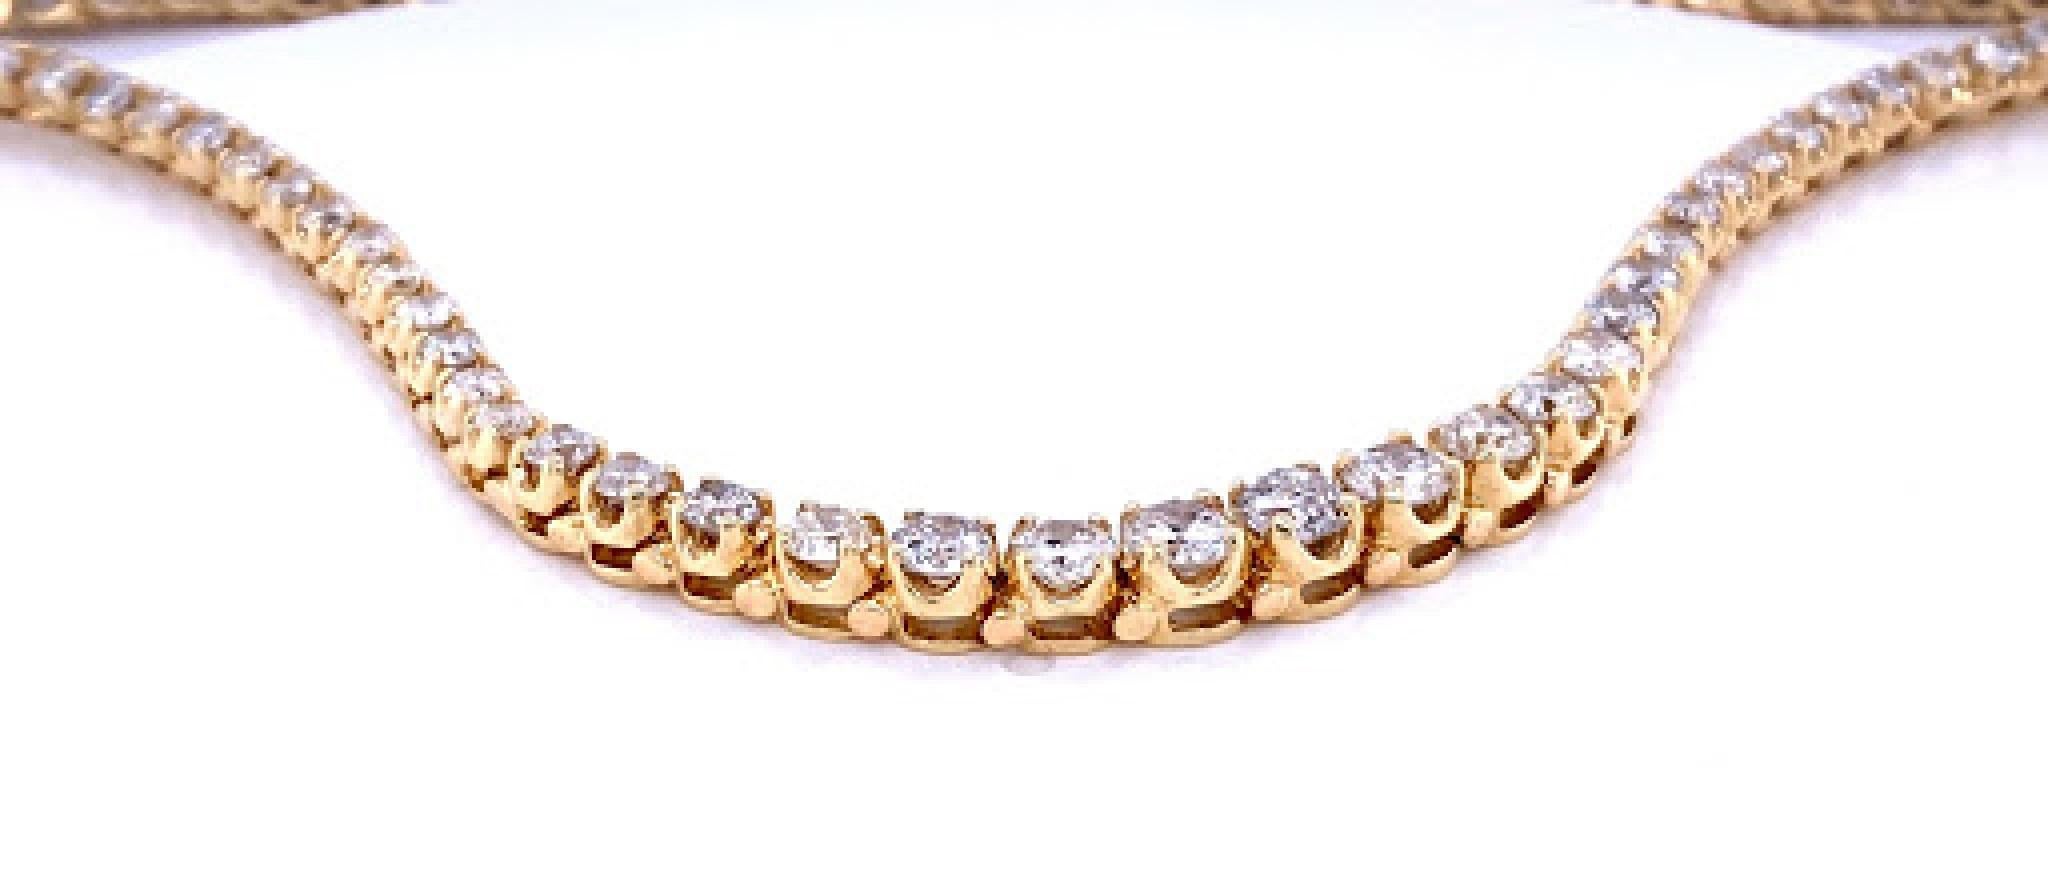 14 karat yellow gold (stamped 14k) graduated diamond tennis necklace. Diamonds decreasing from 4.3 mm to 2.3 mm as they get closer to the clasp. Diamonds are a H/I color, SI, and weigh approximately 9.50 total carats. The necklace measures 16.25